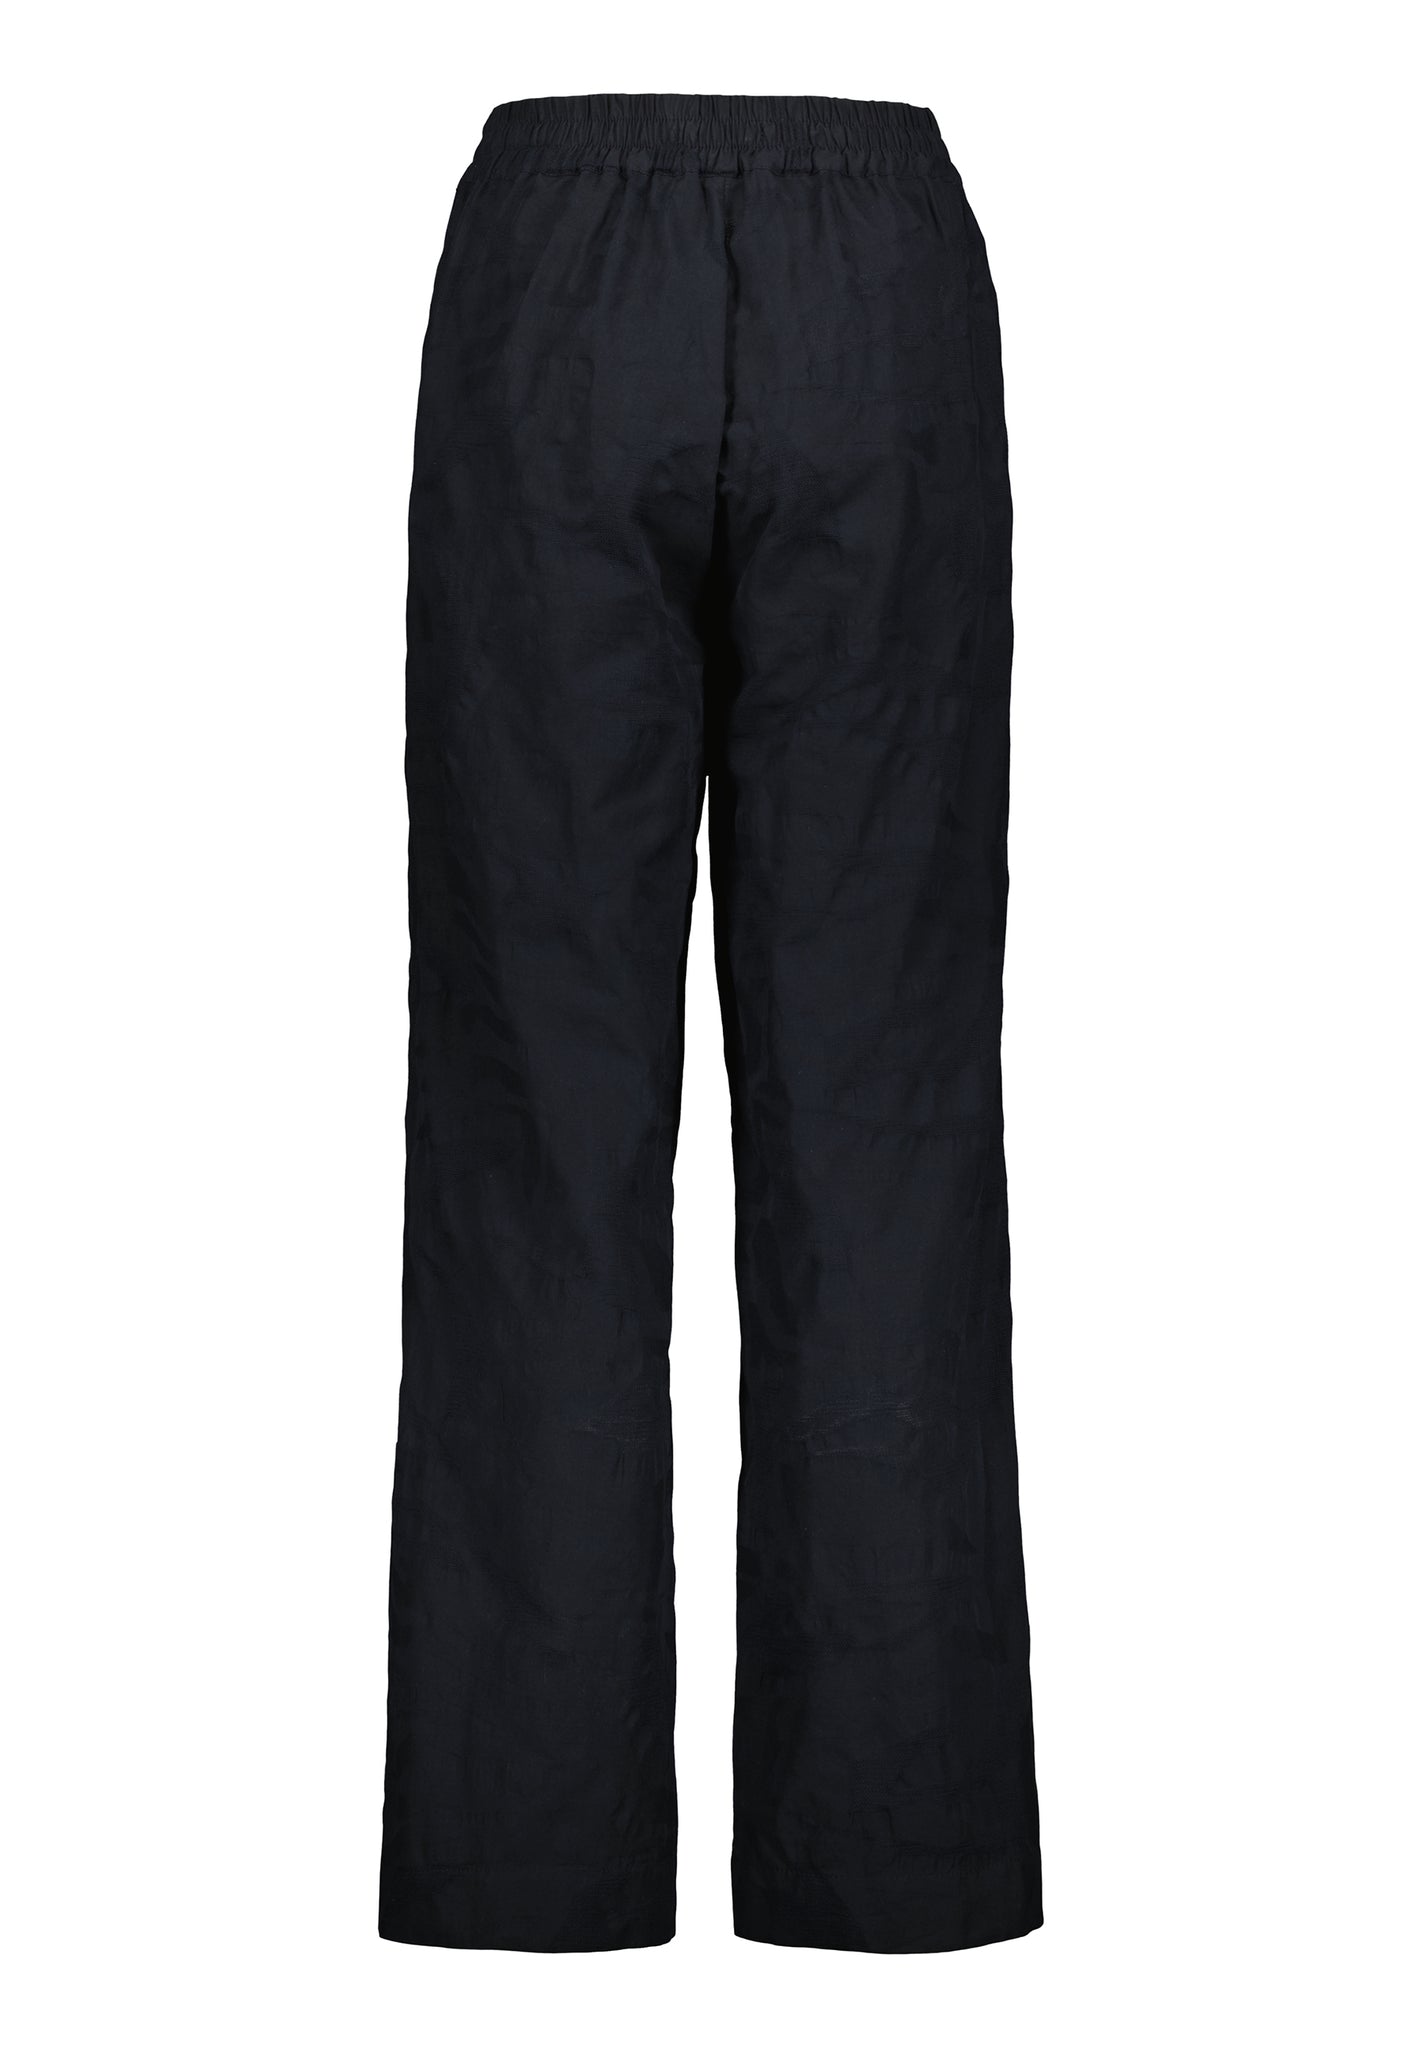 SCRIPPS LOOSE FIT PANTS -  Midnight blue punched cotton